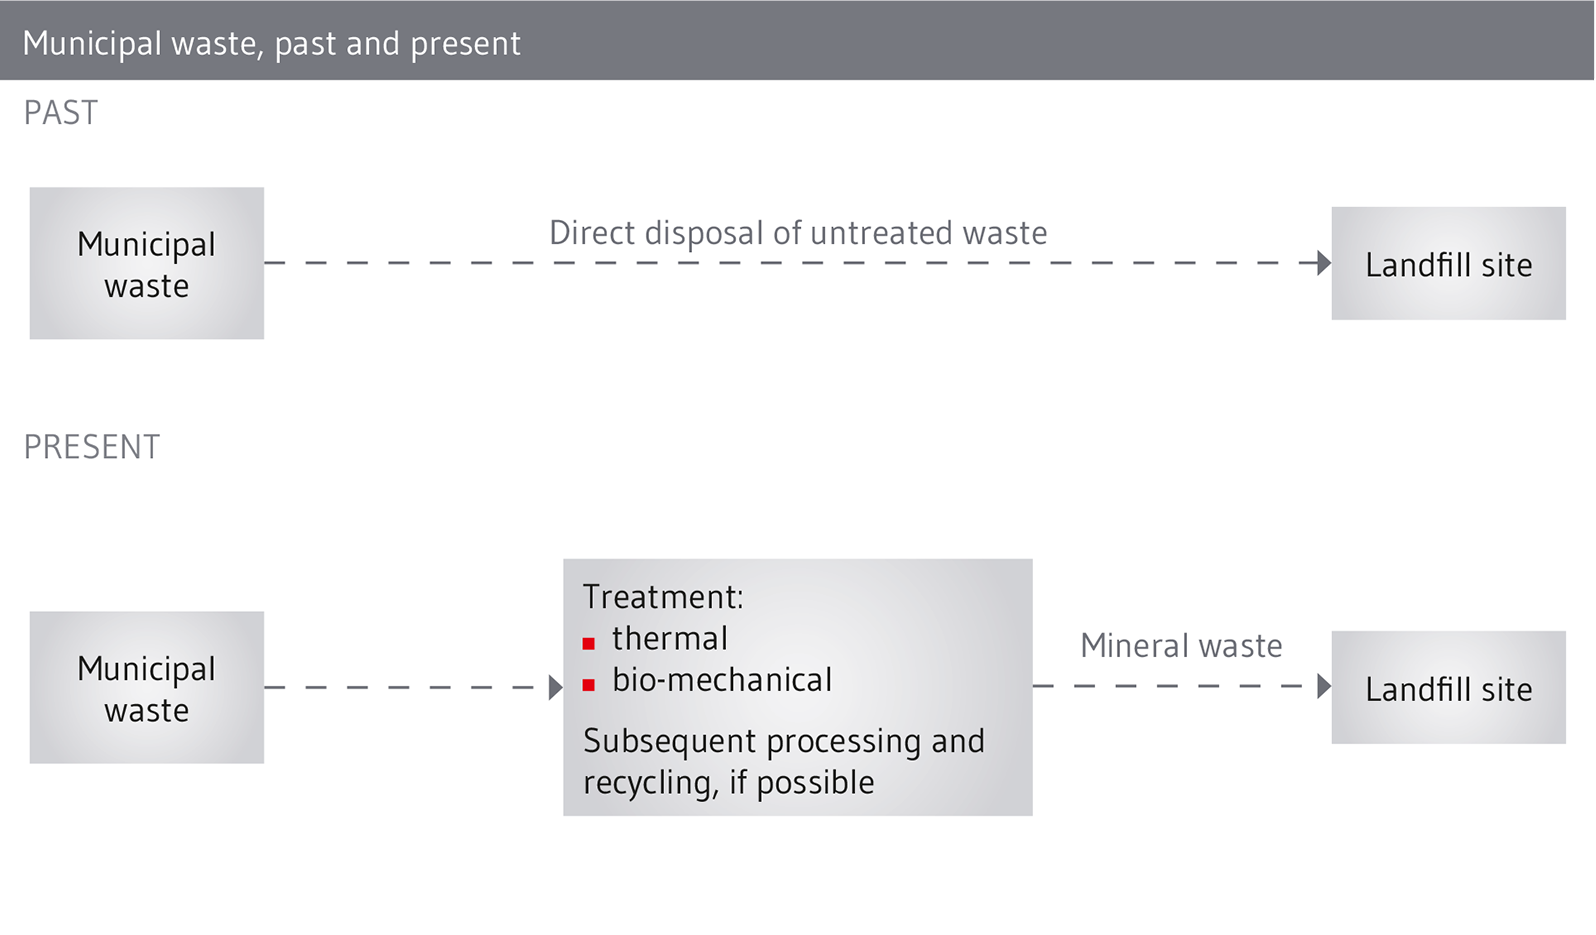 Municipal waste is treated before landfilling